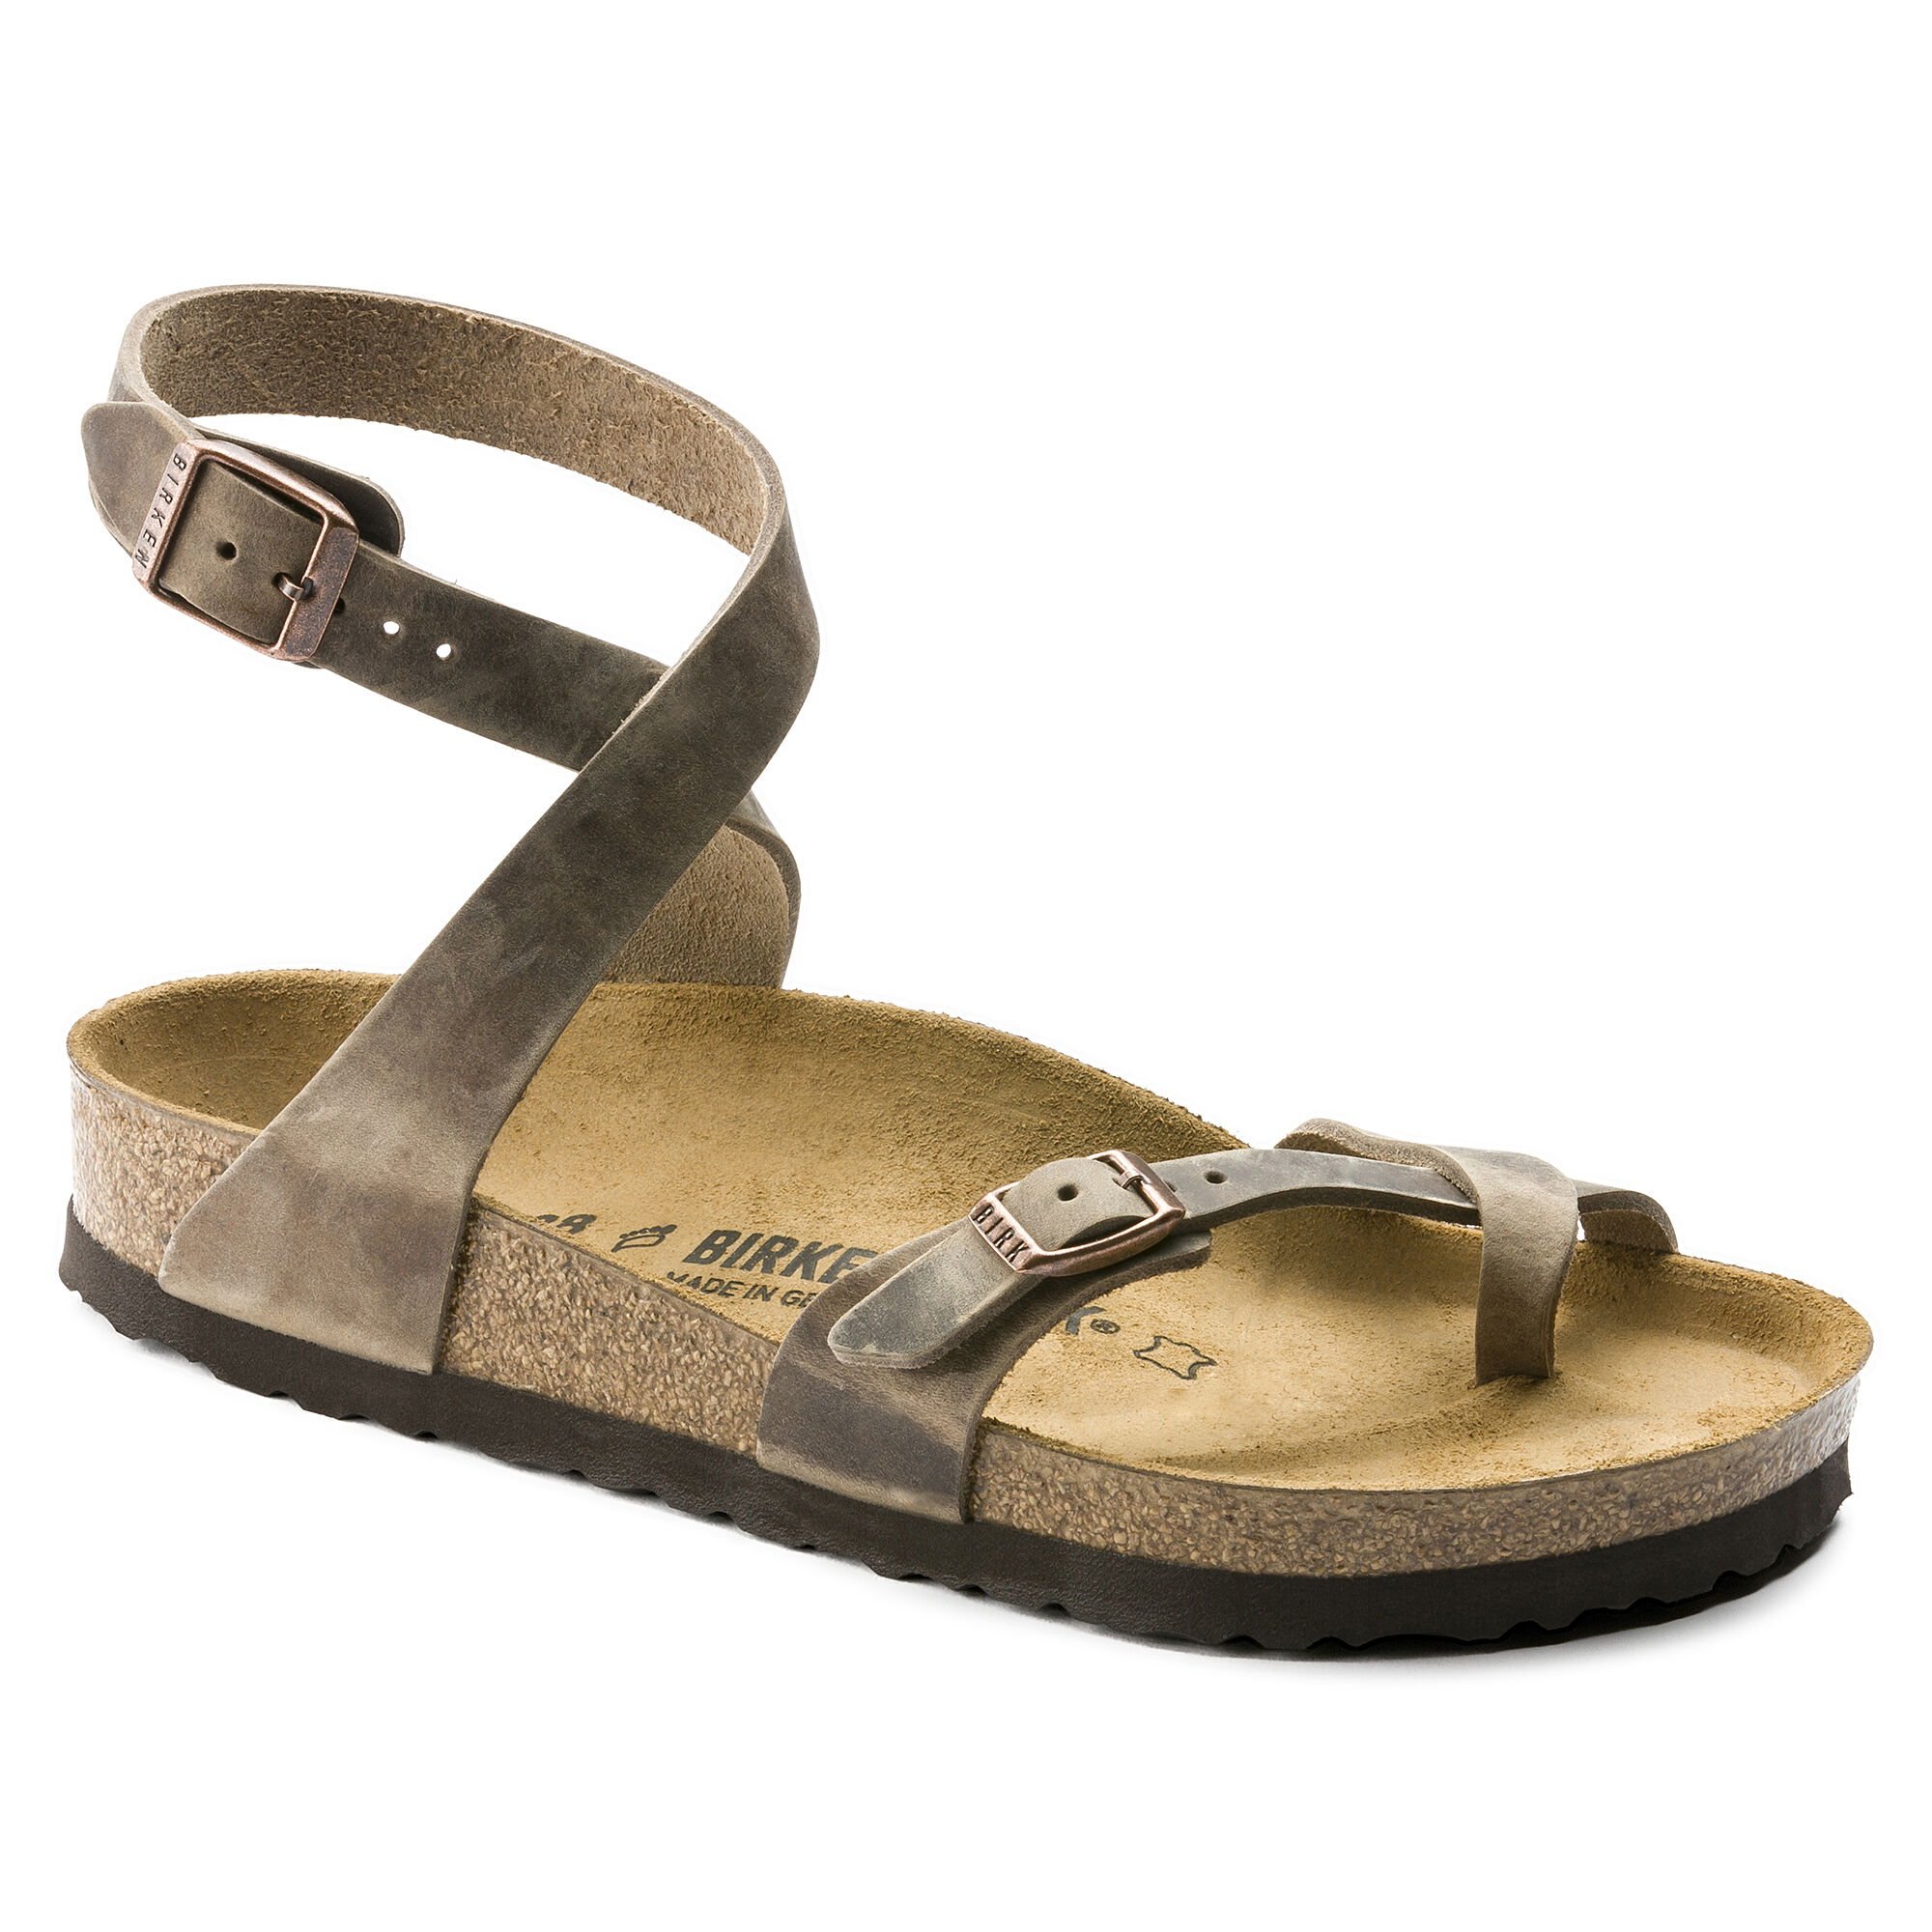 birkenstocks with toe loop and ankle strap